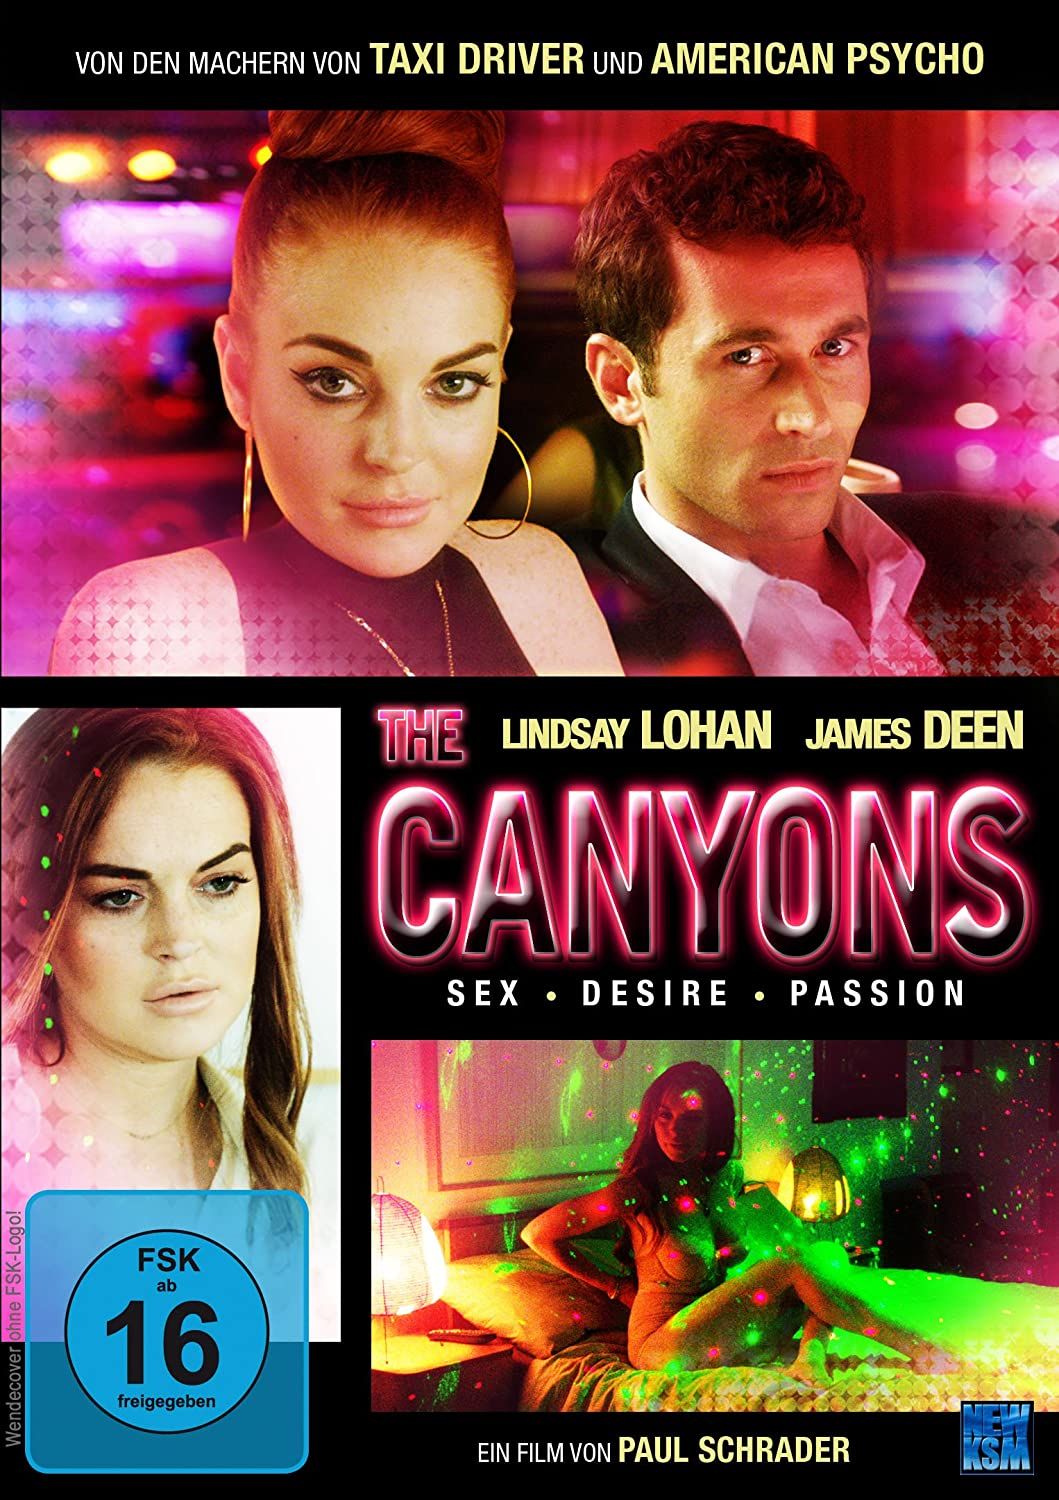 The Canyons (2013) English Adult Movies |